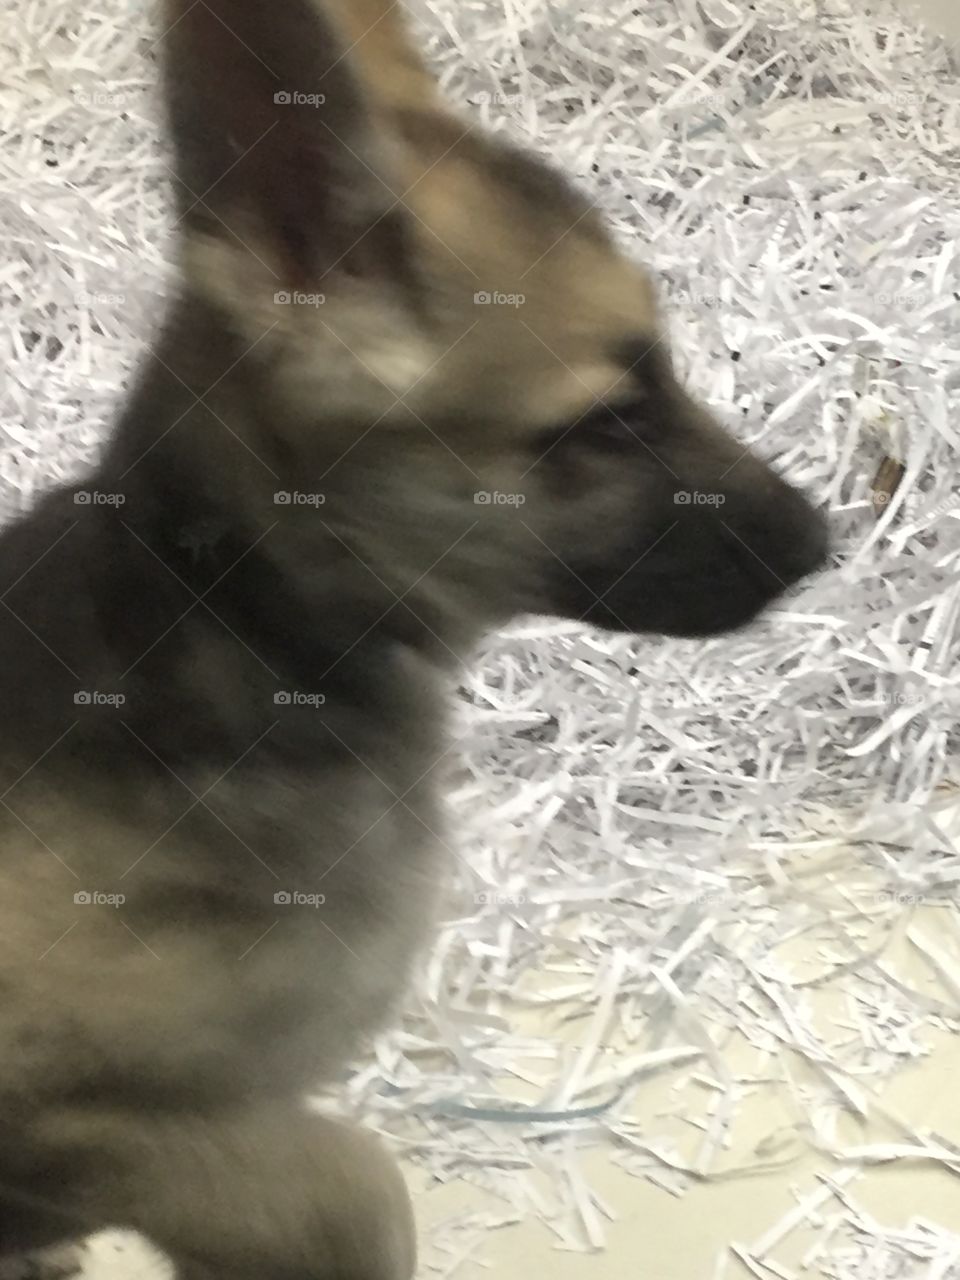 Out of focus puppy
